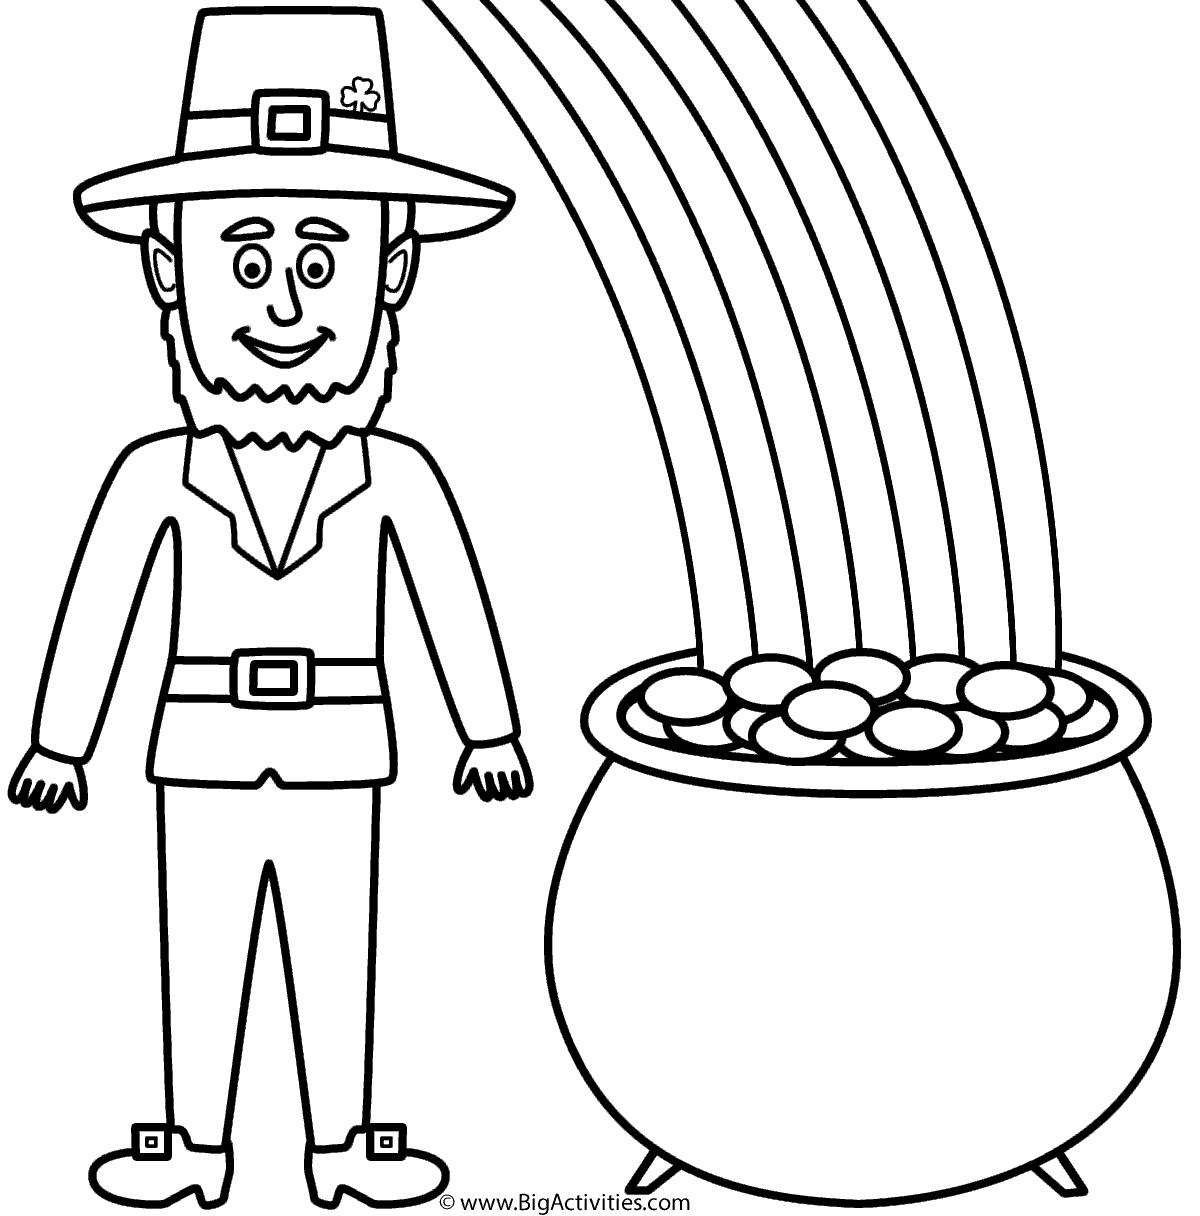 Leprechaun with pot of gold and rainbow Coloring Page (St. Patrick's Day)